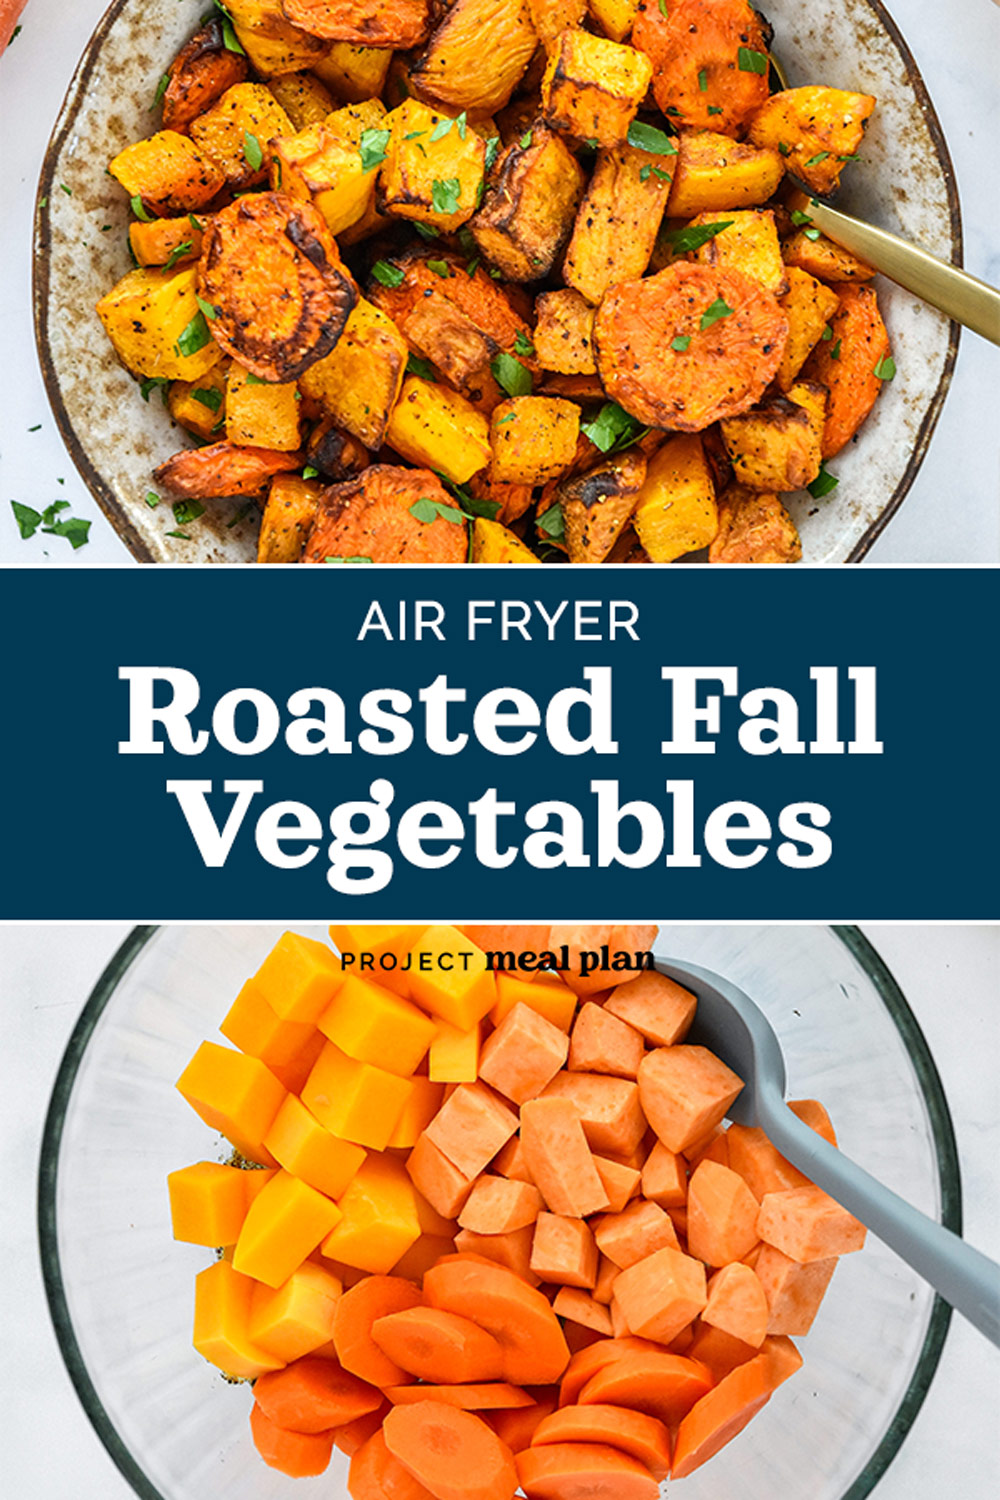 Air Fryer Roasted Fall Vegetables - Project Meal Plan